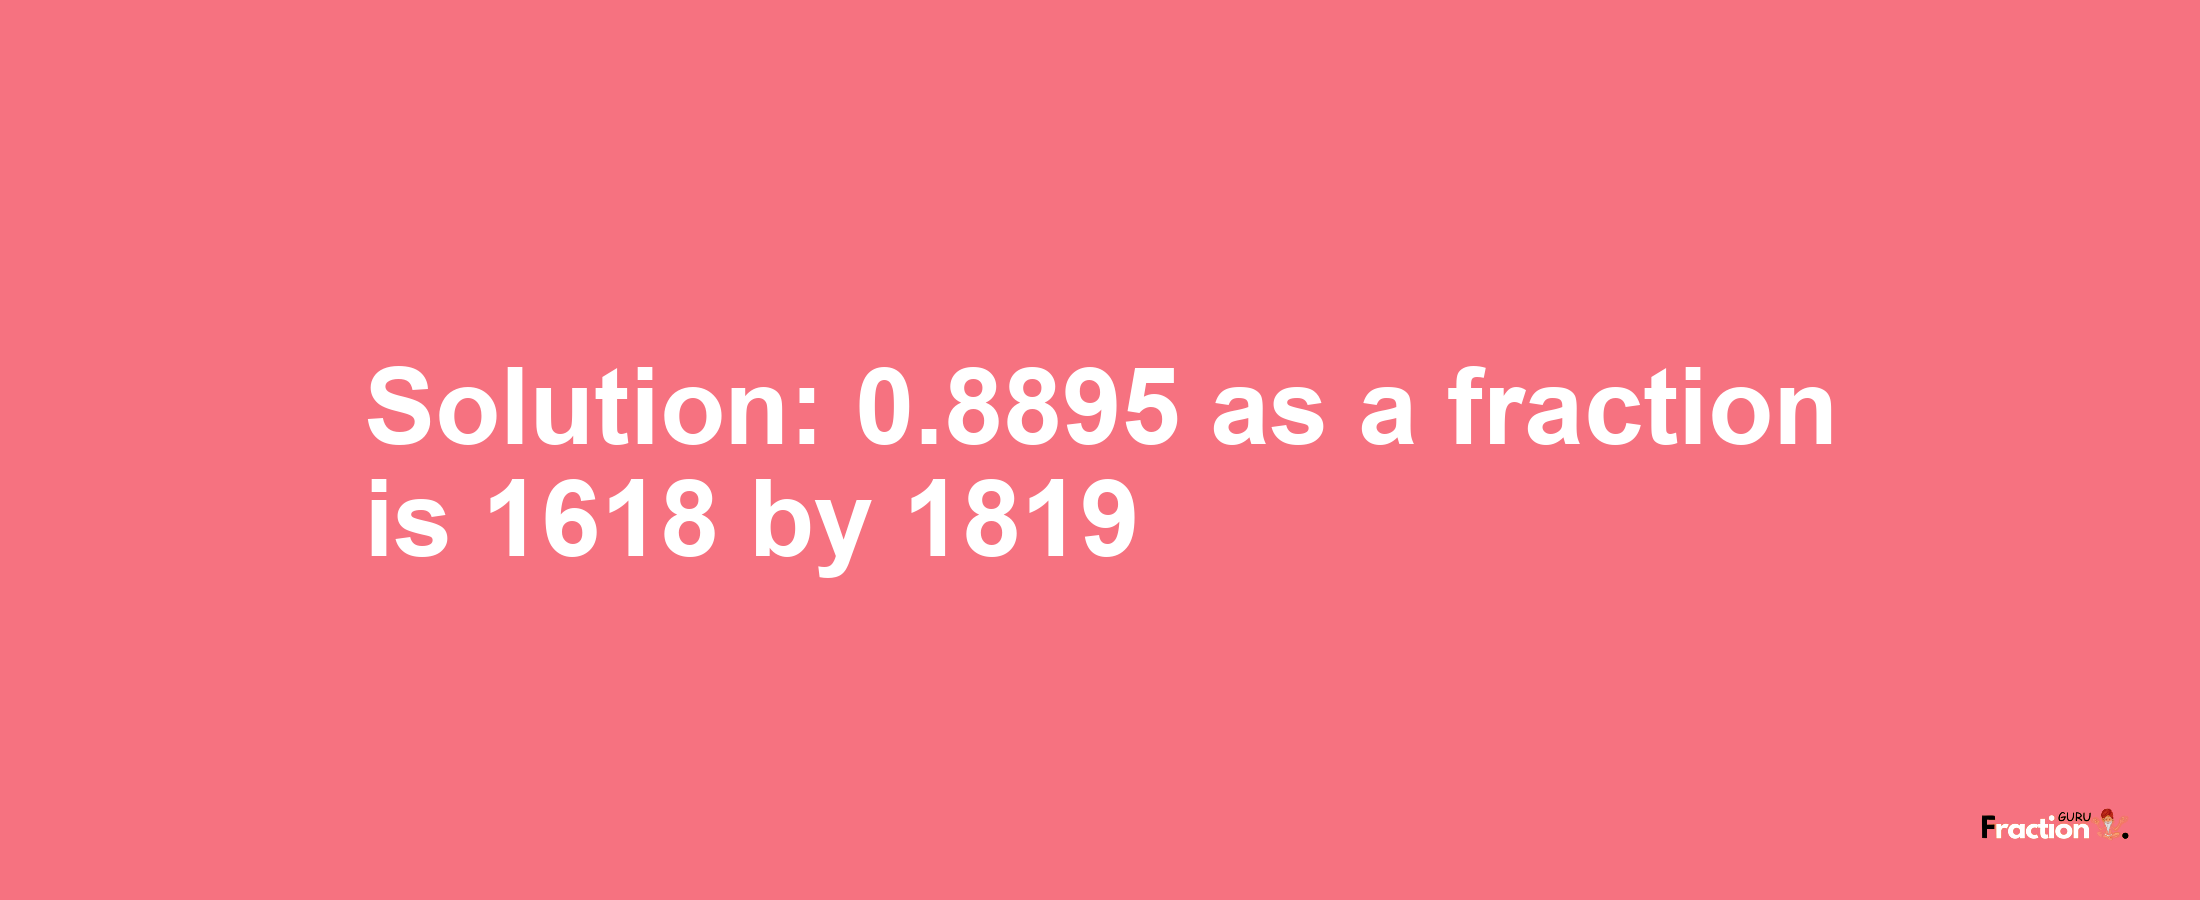 Solution:0.8895 as a fraction is 1618/1819